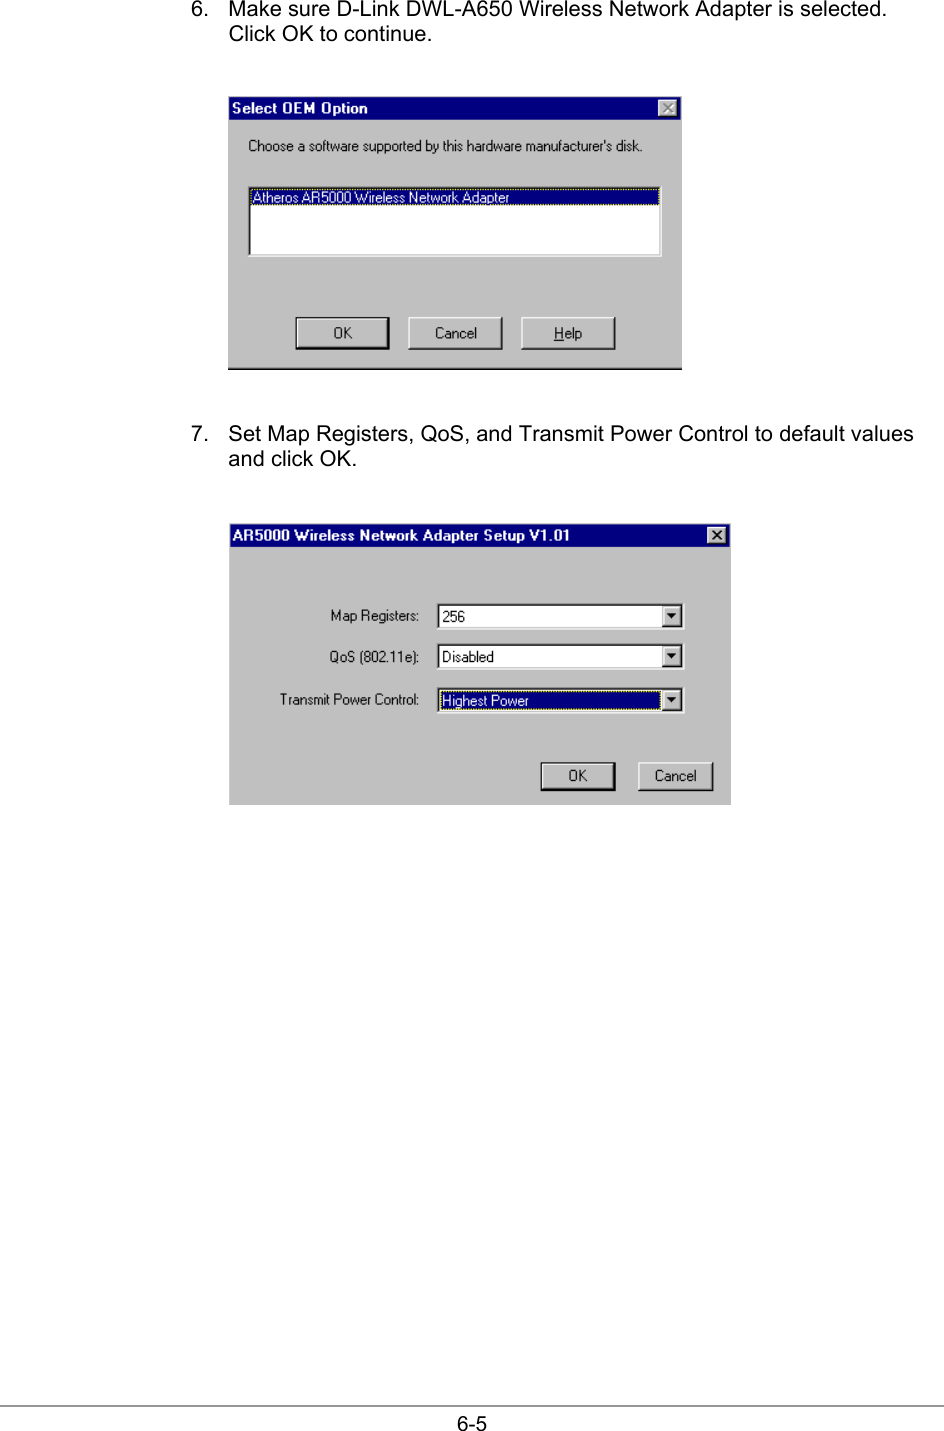  6-5 6.  Make sure D-Link DWL-A650 Wireless Network Adapter is selected. Click OK to continue.   7.  Set Map Registers, QoS, and Transmit Power Control to default values and click OK.   